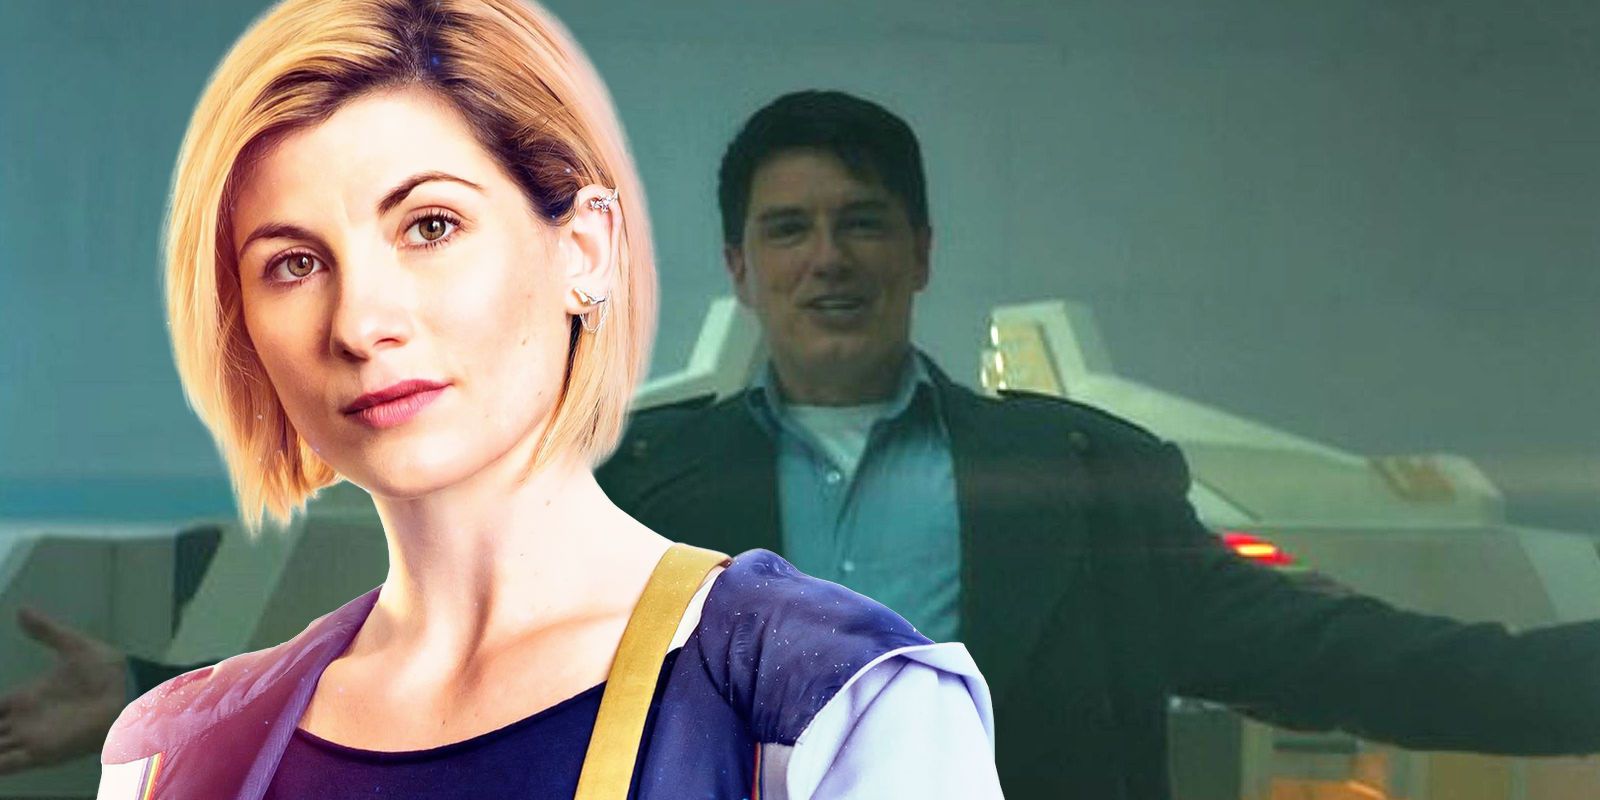 John Barrowman as Captain Jack Harkness and Jodie Whittaker as Thirteenth Doctor in Doctor Who